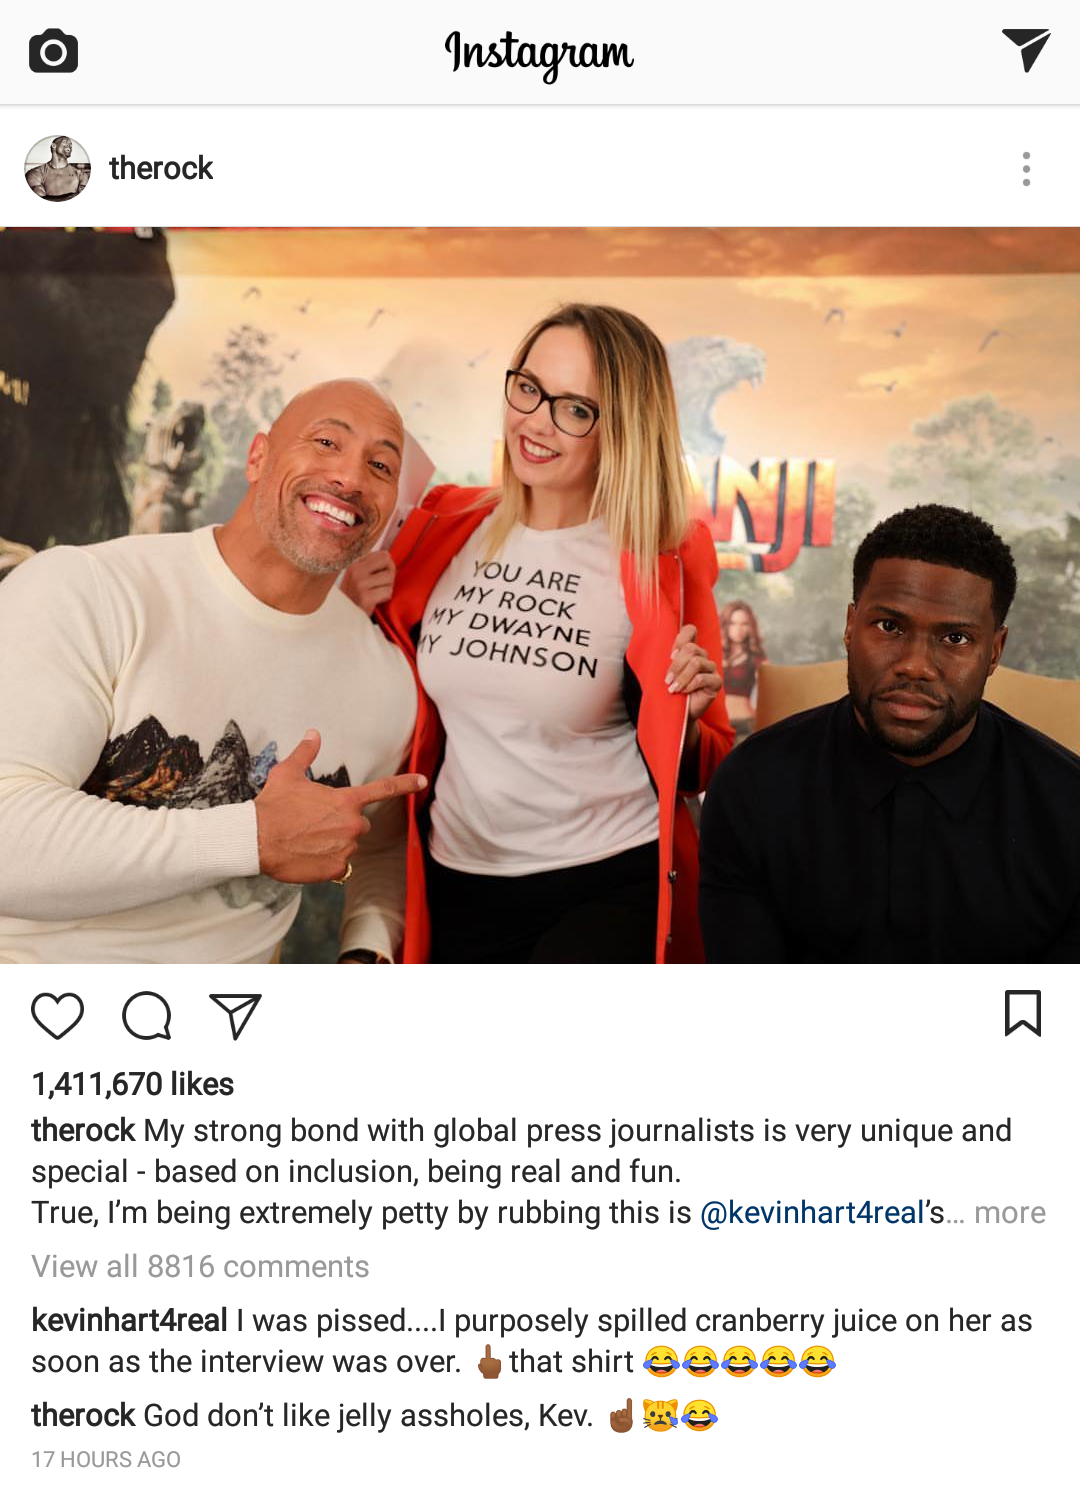 random you are my rock my dwayne my johnson girl - Instagram therock Du Are My Rock Wy Owayne Y Johnson av 1,411,670 therock My strong bond with global press journalists is very unique and special based on inclusion, being real and fun. True, I'm being ex